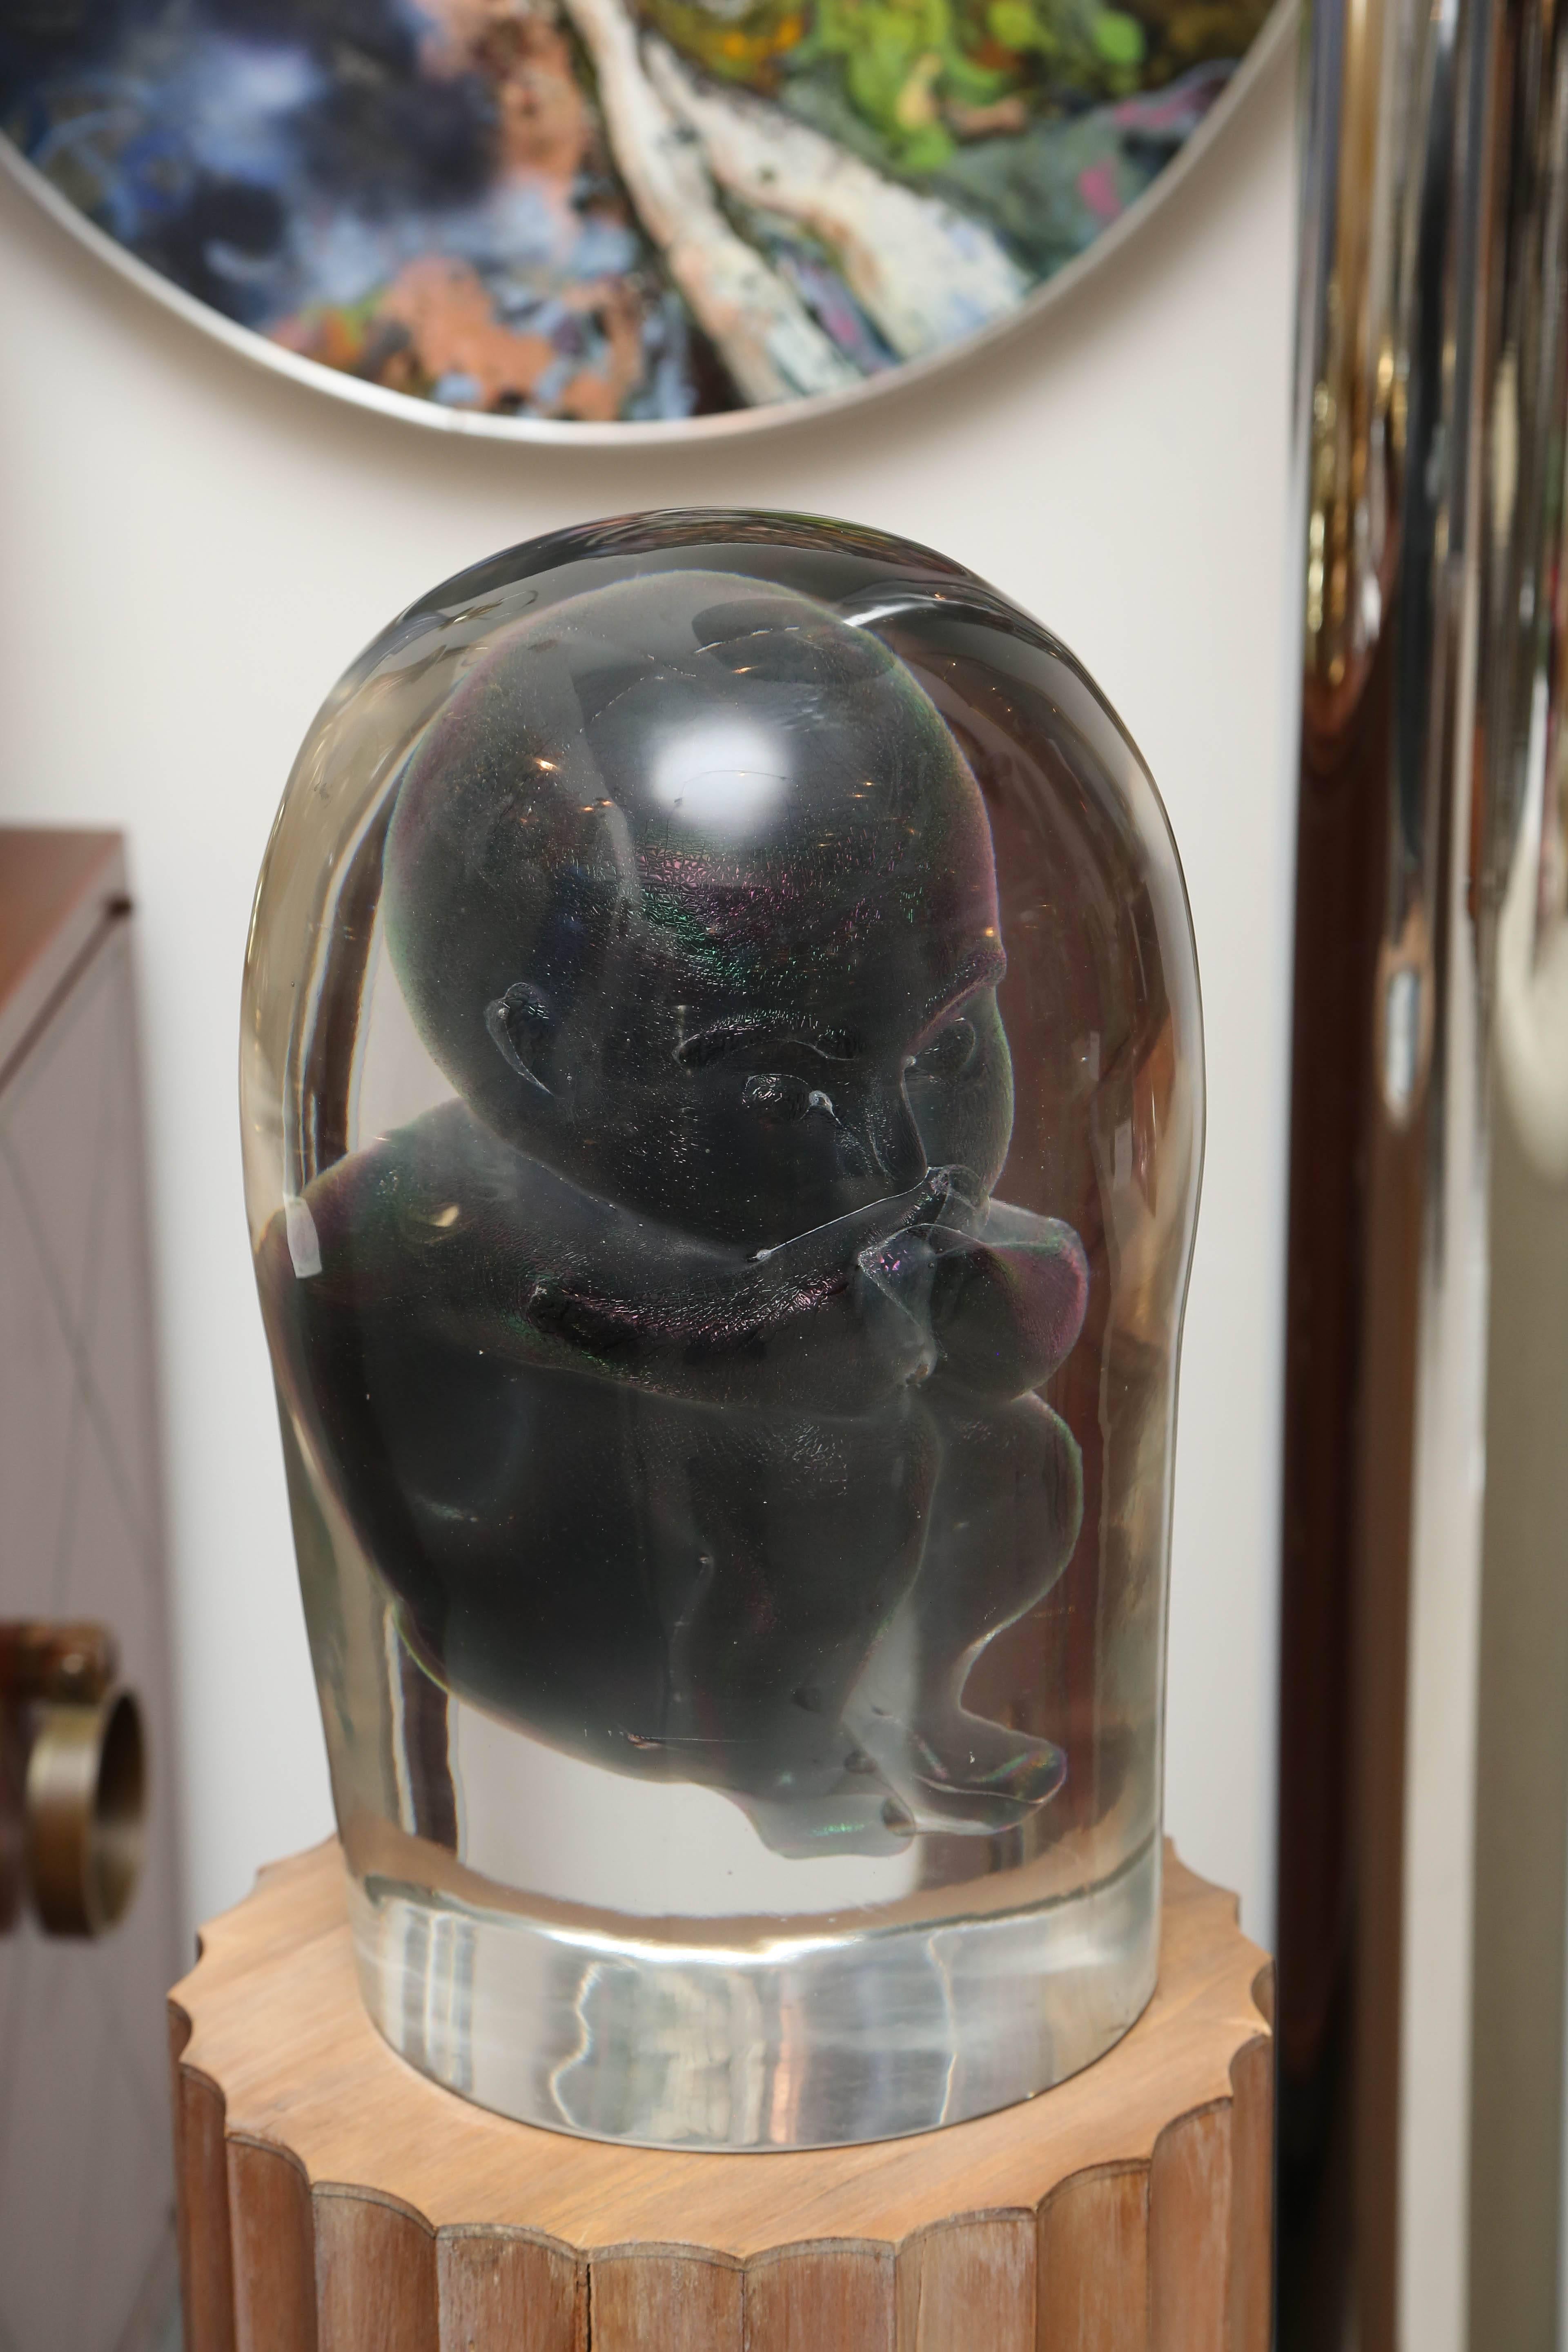 Truly strange objet de vertu made of Murano glass made by Elio Raffaelli. The fetus is truly iridescent deep blue in person-- but photographed very dark. The sculpture is extremely heavy (110lbs) and intriguing from all angles. It is sold with the